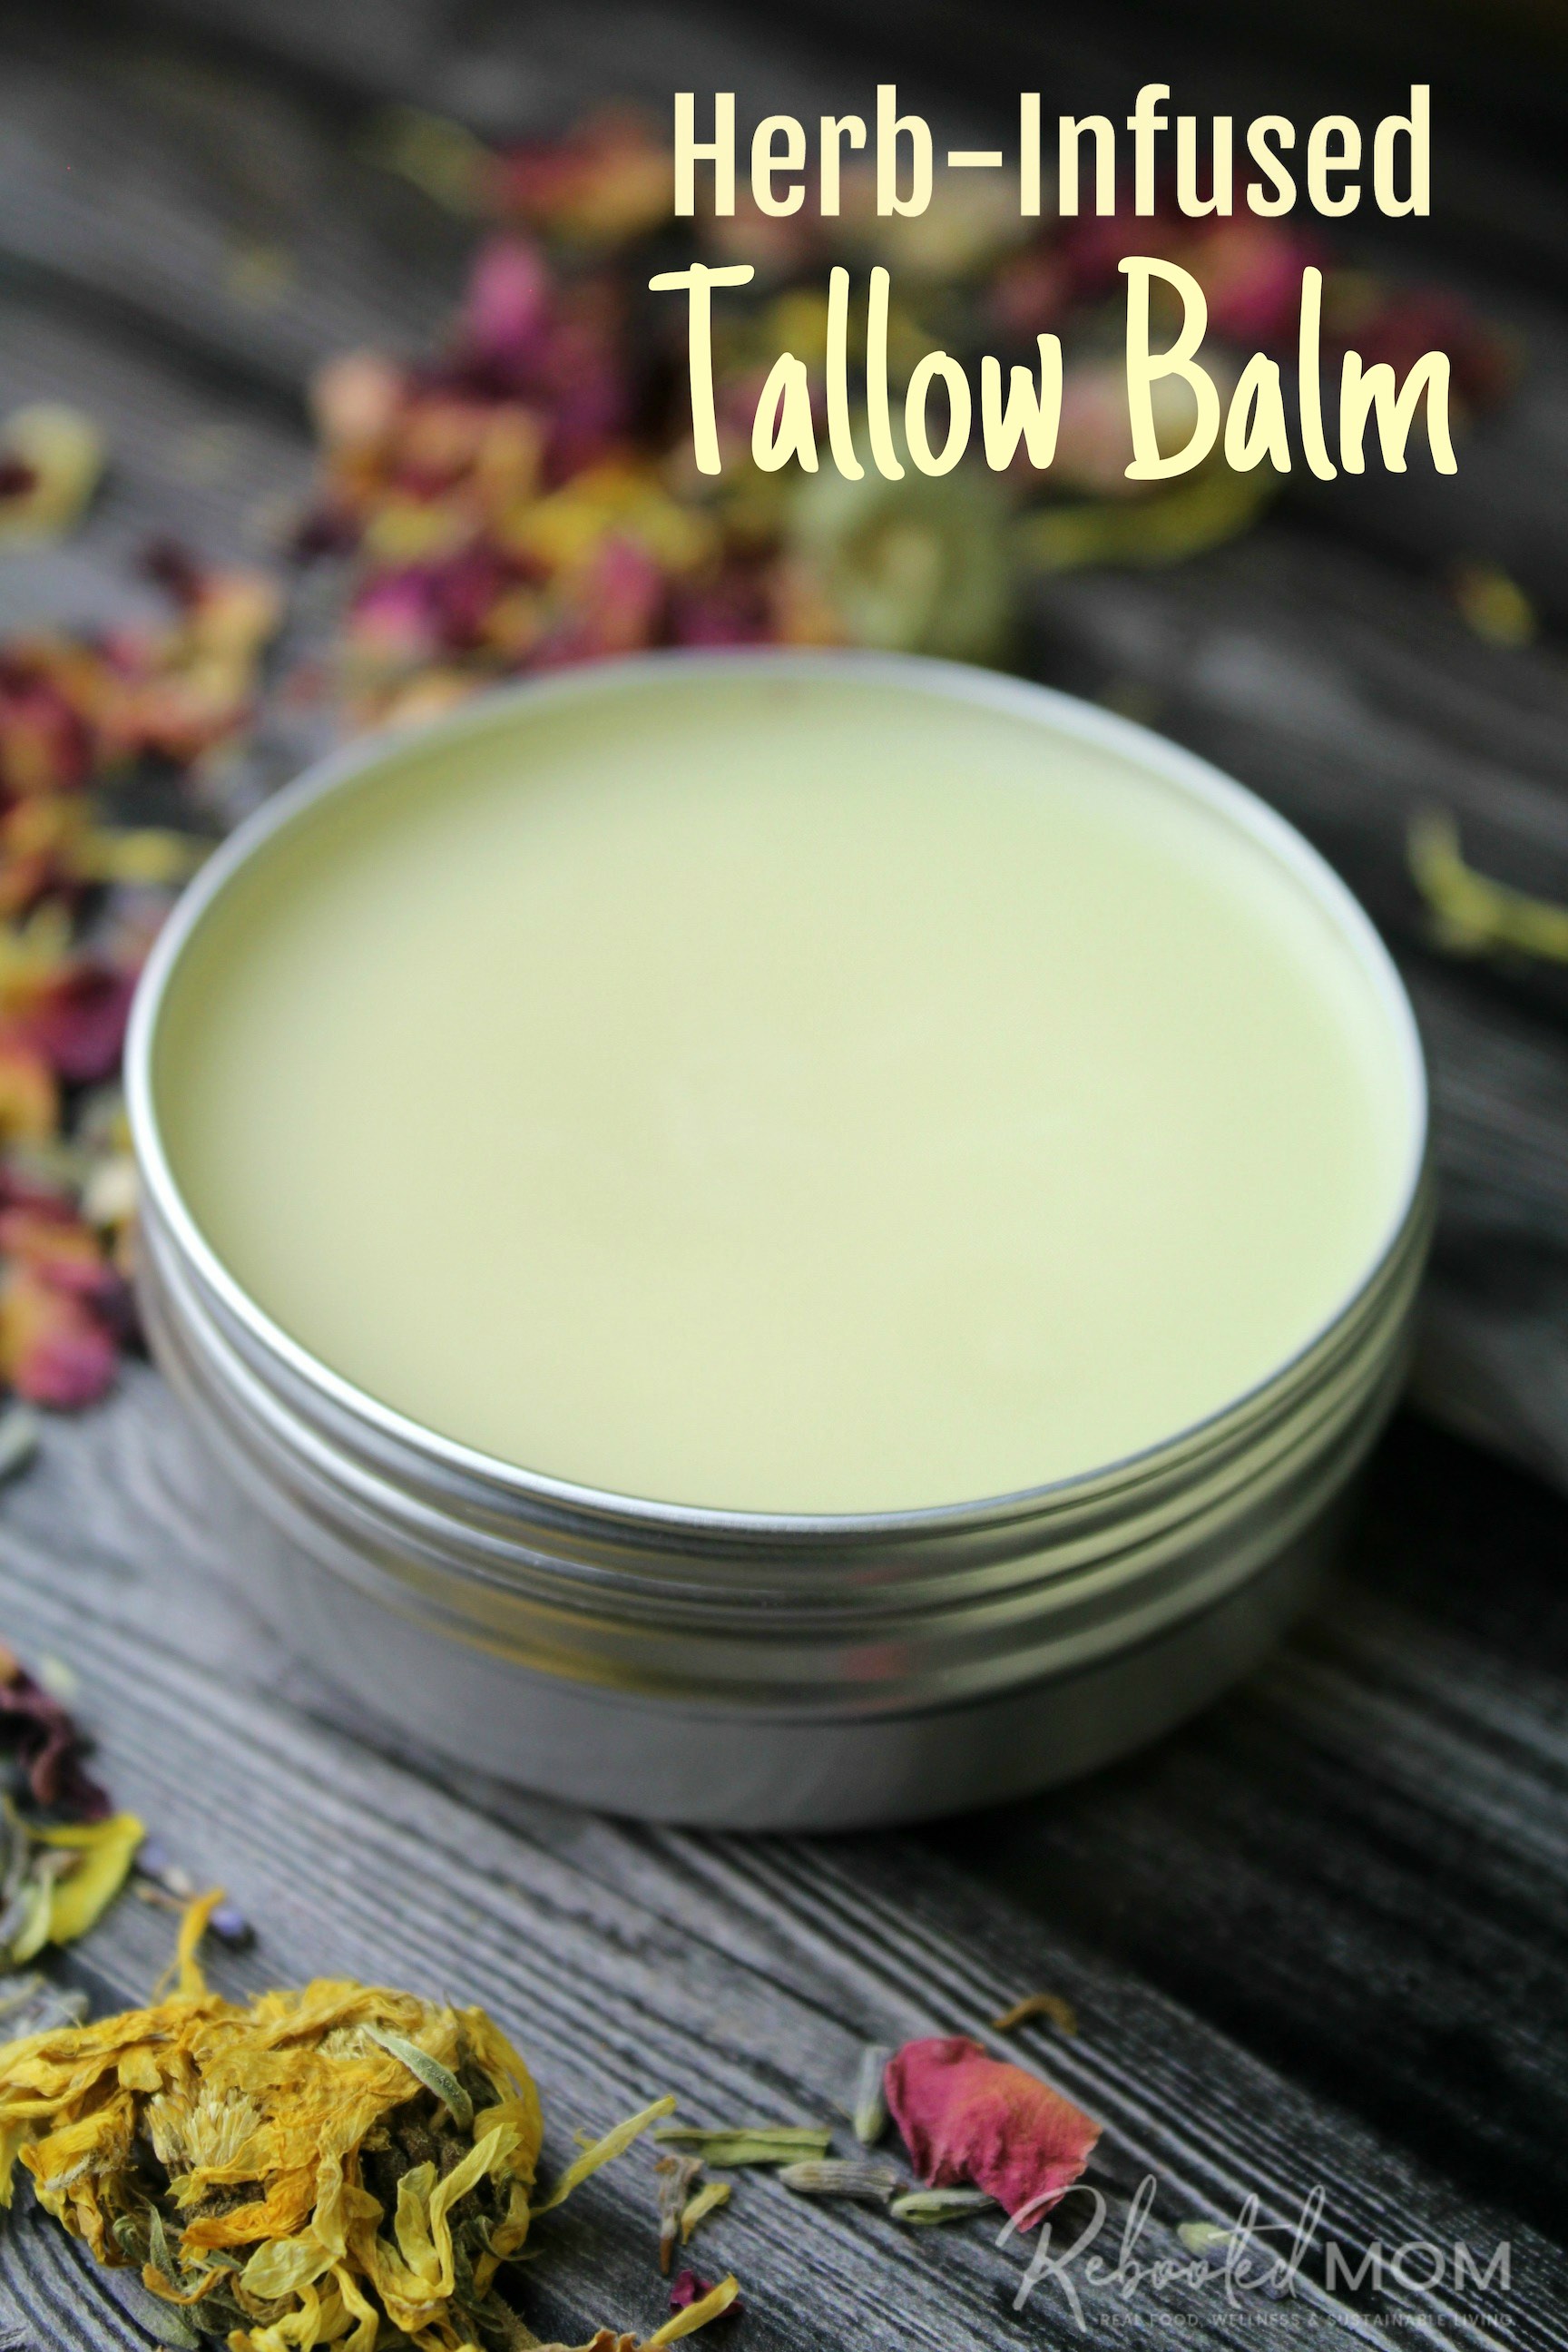 This herbal tallow balm is wonderful for supporting healthy skin and is easy to make at home with a few simple, skin-nourishing ingredients! #tallow #beauty #balm #herb #herbal #herbinfused #beautybalm #skincare #DIY